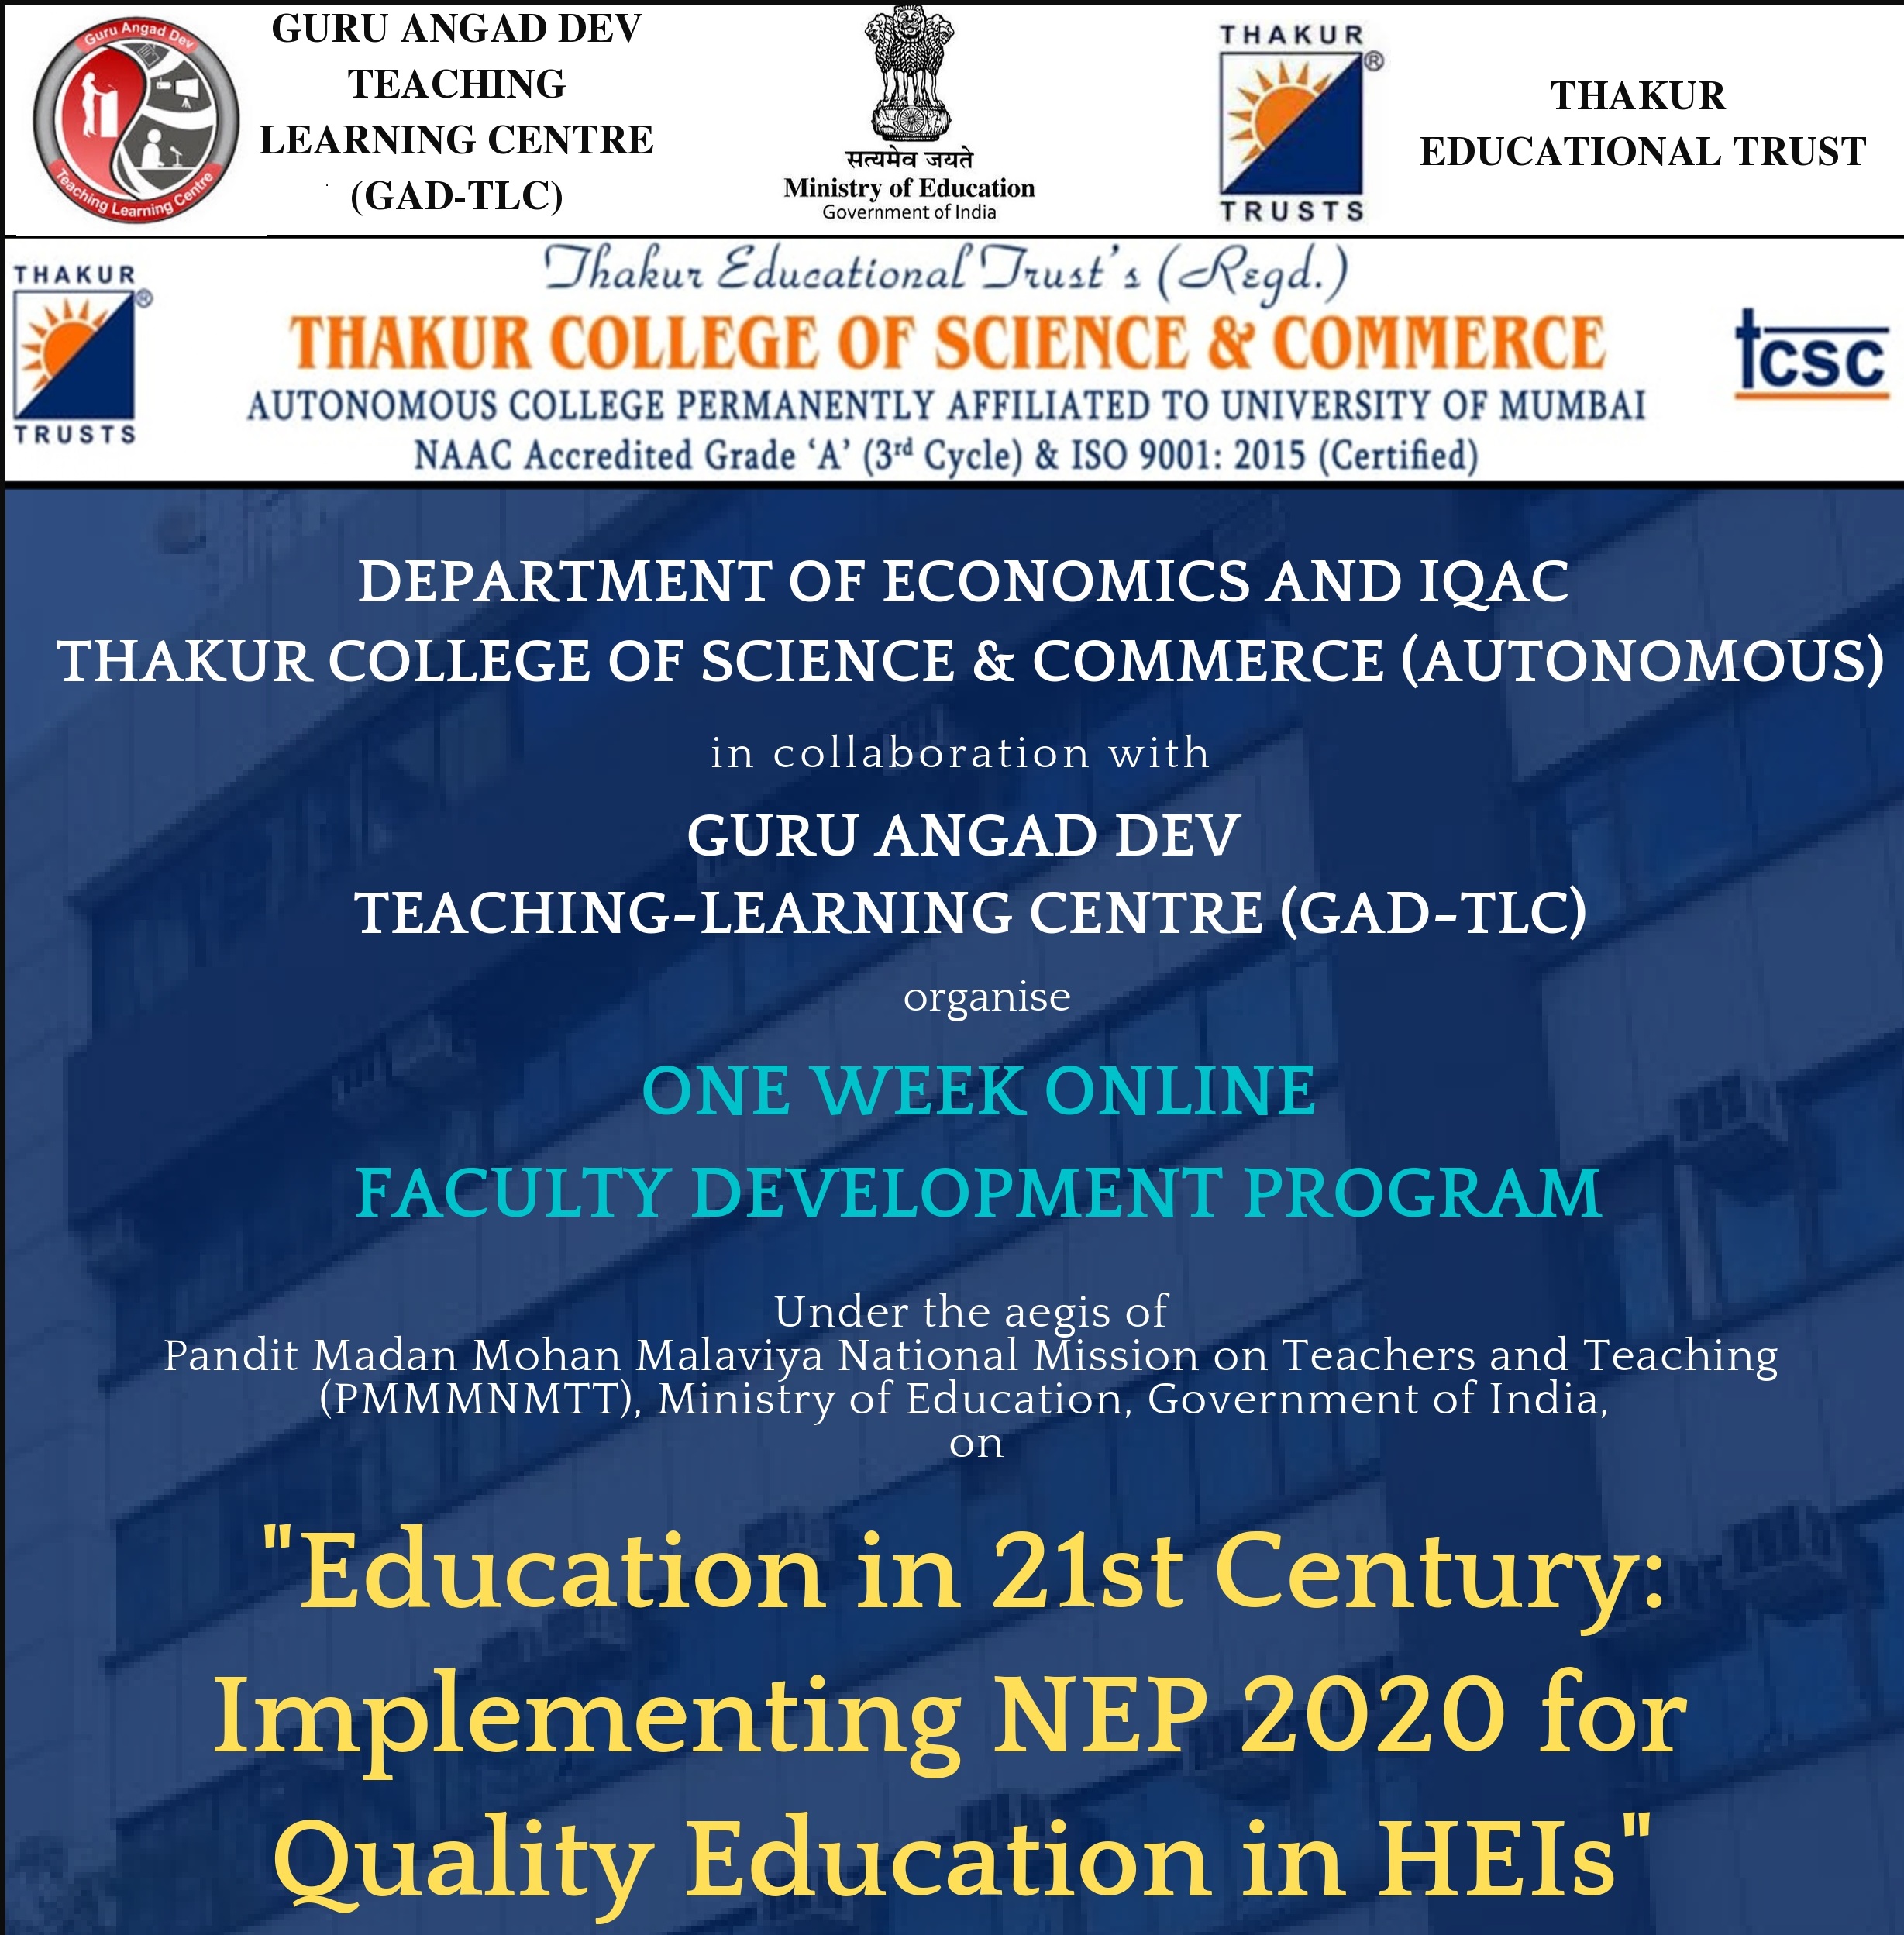 Course Image OFDP-90: Education in 21st Century: Implementing NEP 2020 for Quality Education in HEIs